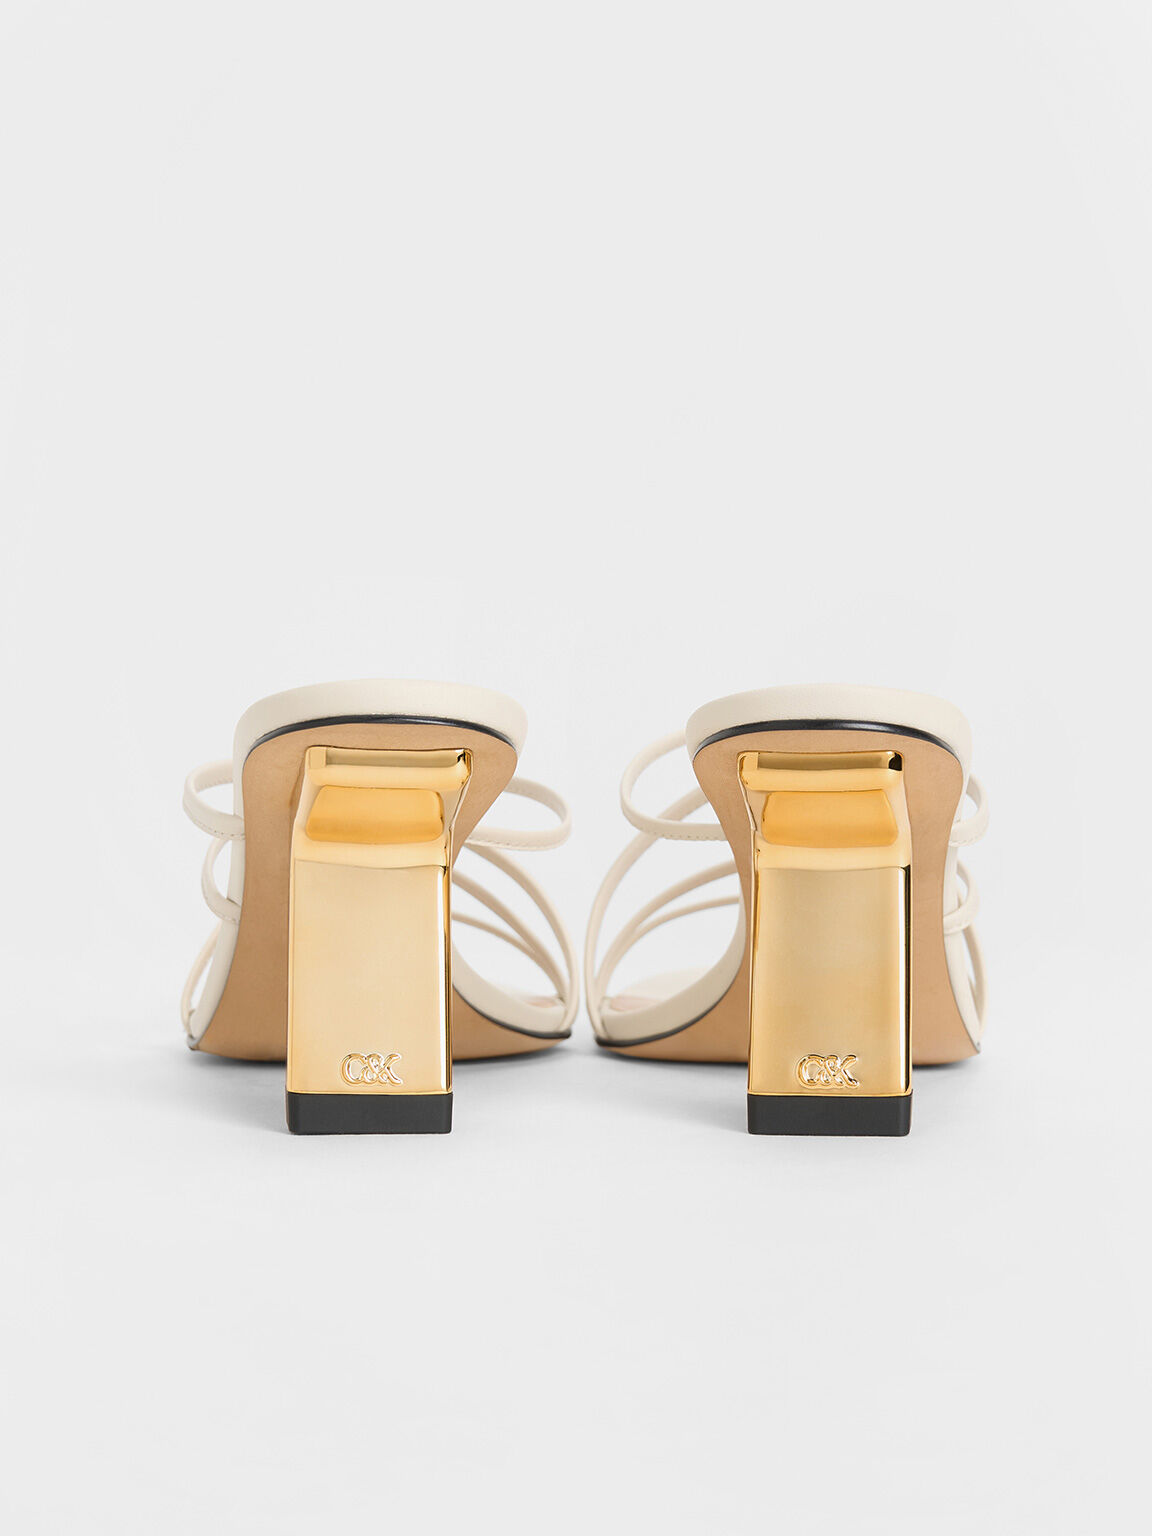 Giày mules cao gót Orly Leather Strappy Slant-Heel, Trắng, hi-res